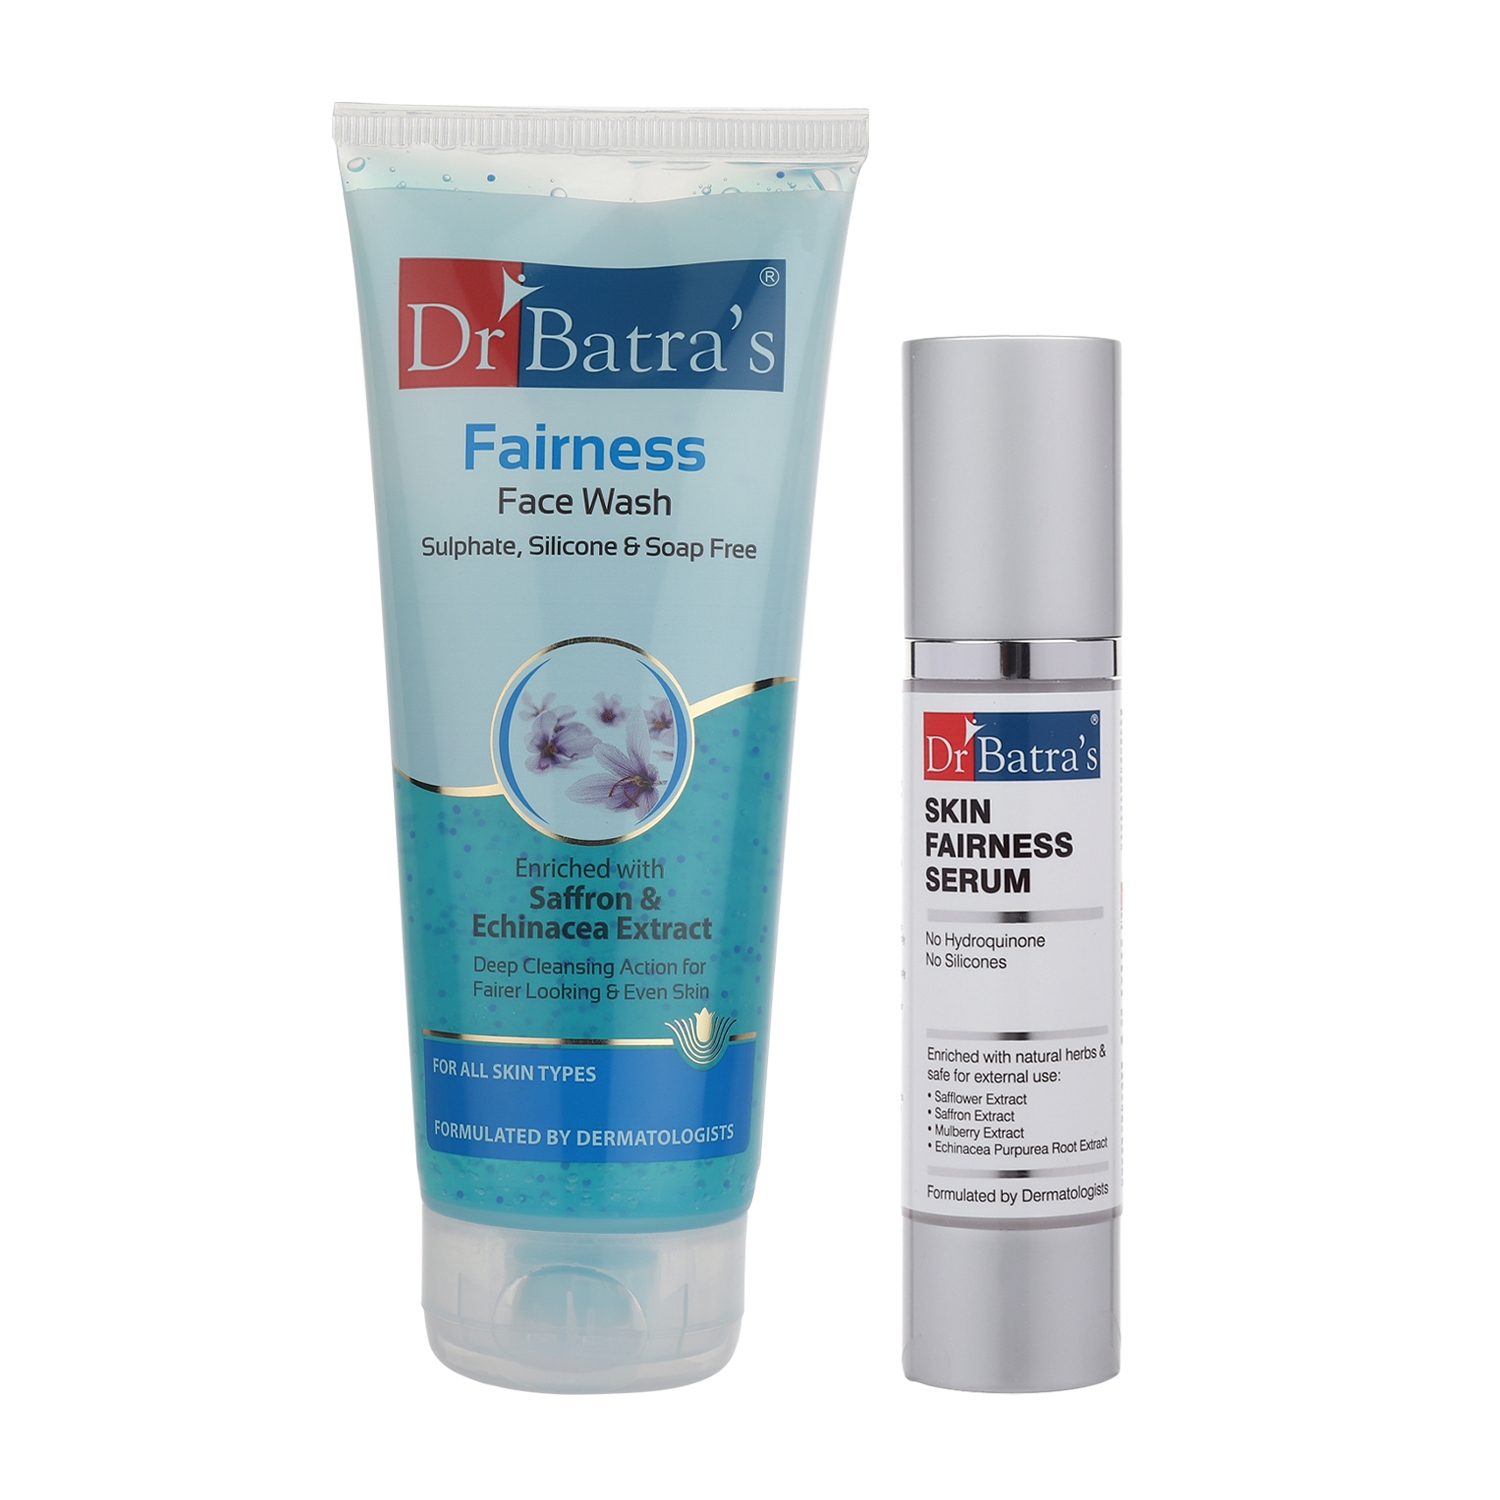 Dr Batra's | Dr Batra's Fairness Face Wash 200 gm. And Skin Fairness Serum - 50 g (Pack of 2 Men and Women)